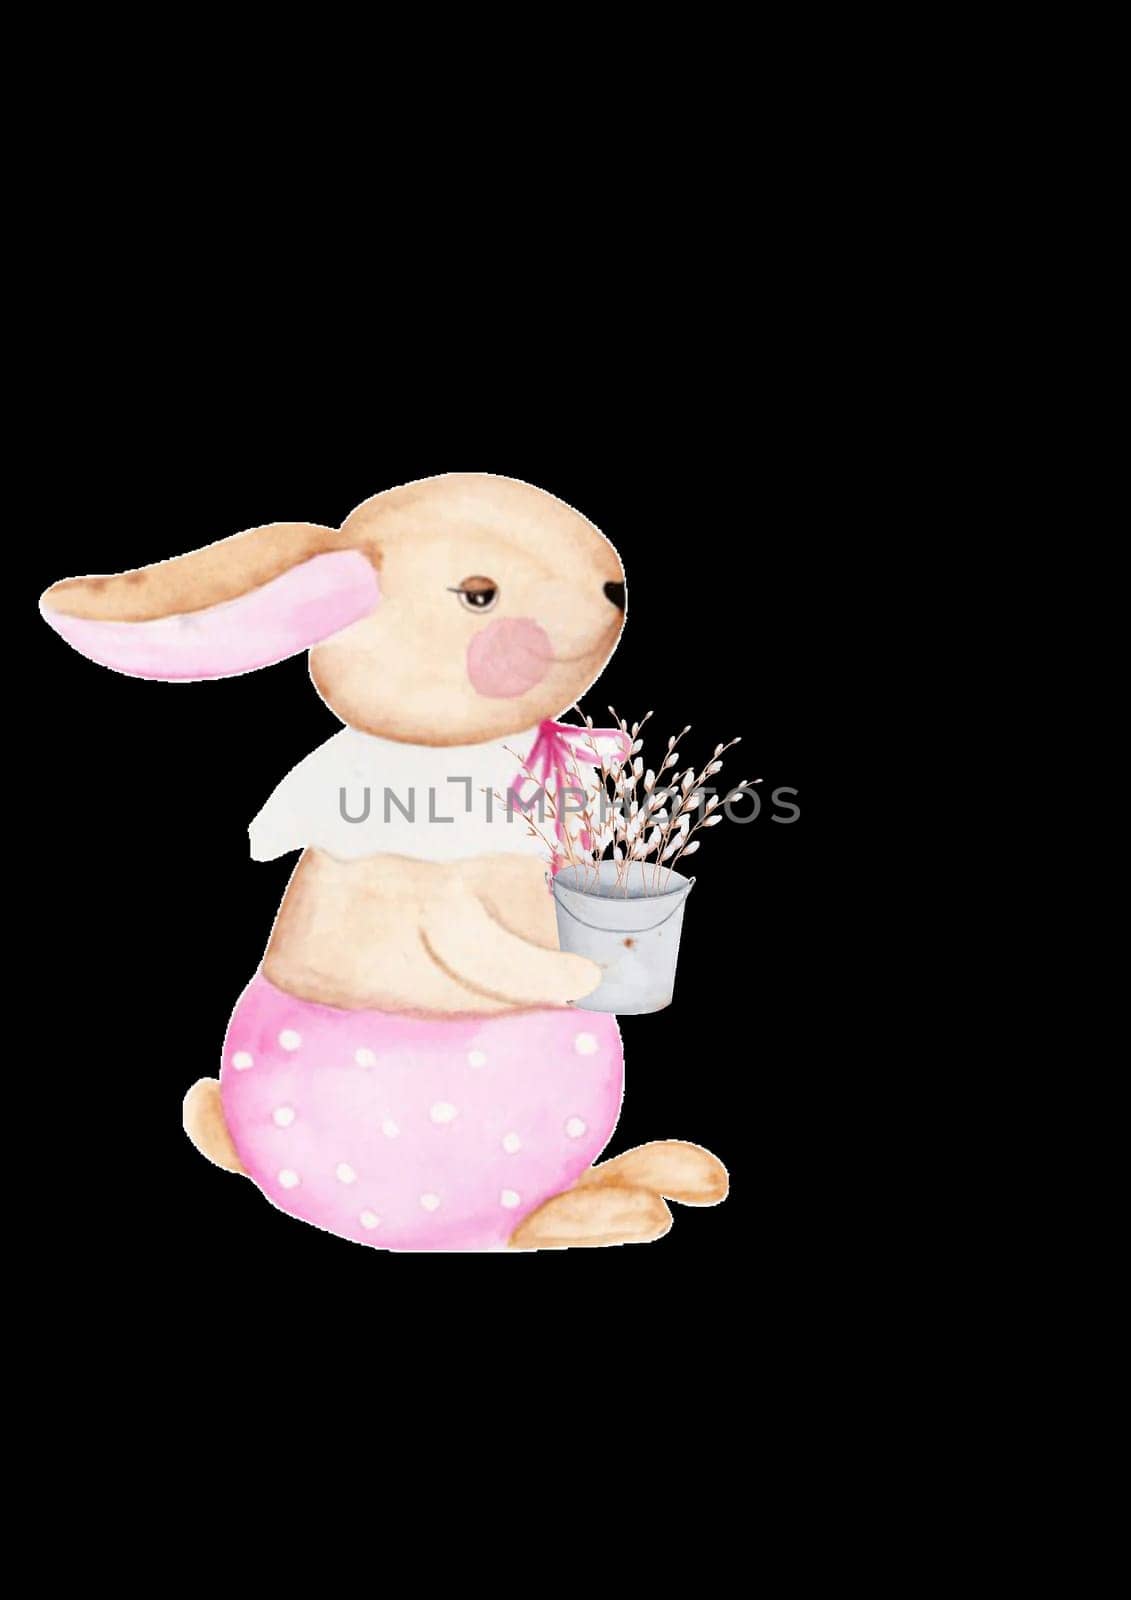 Easter bunny isolate cute watercolor picture for Easter. for decorating banners, invitation cards, pillowcases, napkins. High quality photo